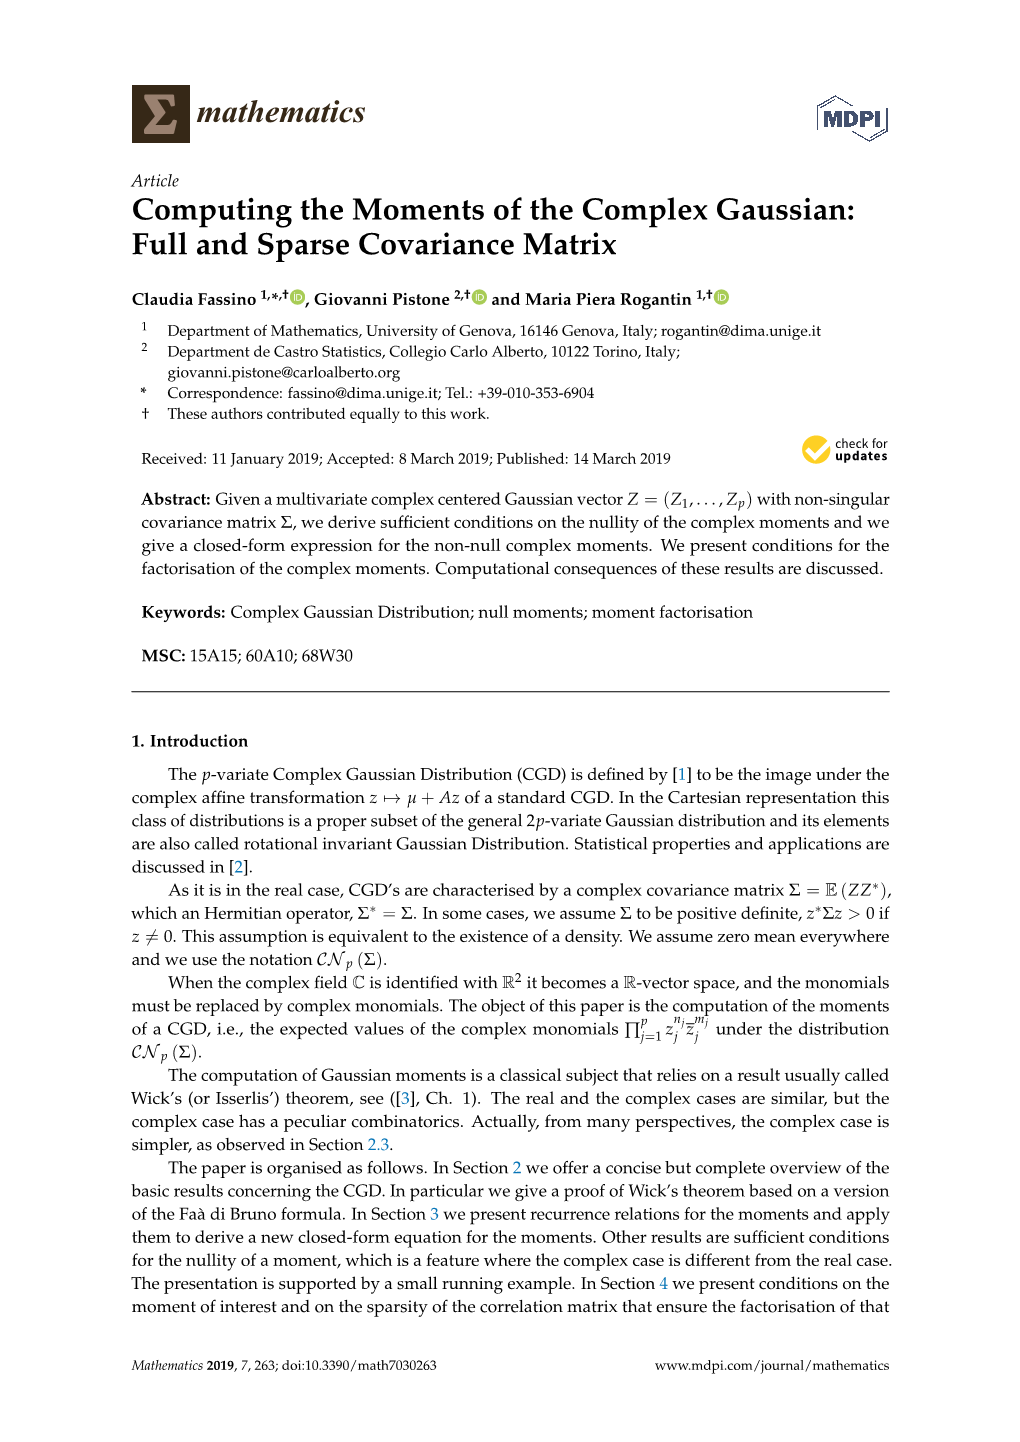 Computing the Moments of the Complex Gaussian: Full and Sparse Covariance Matrix